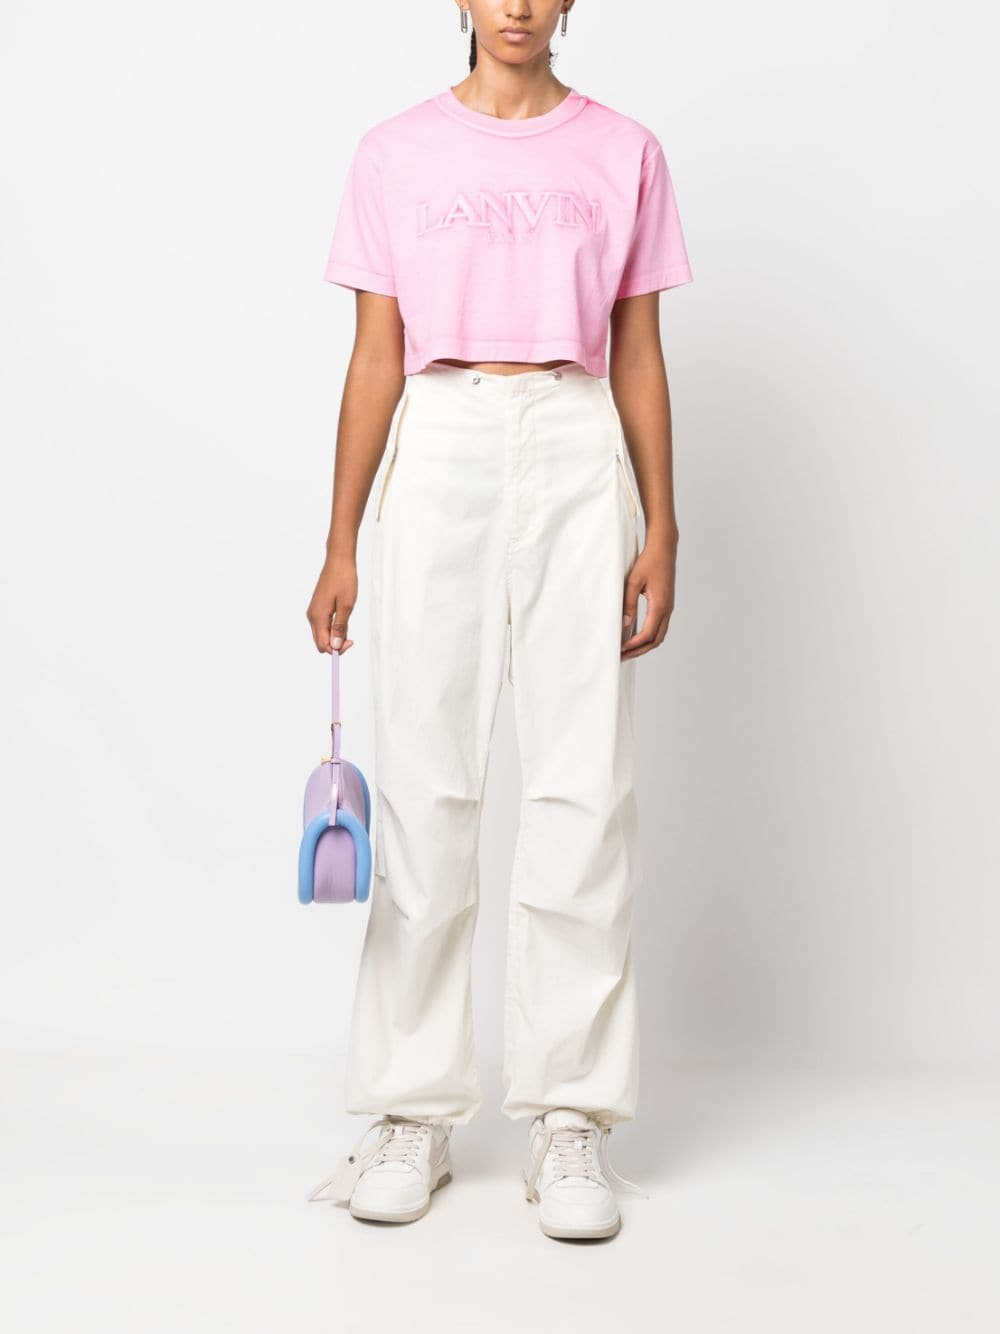 Lanvin logo-embroidered cropped T-shirt - Roze